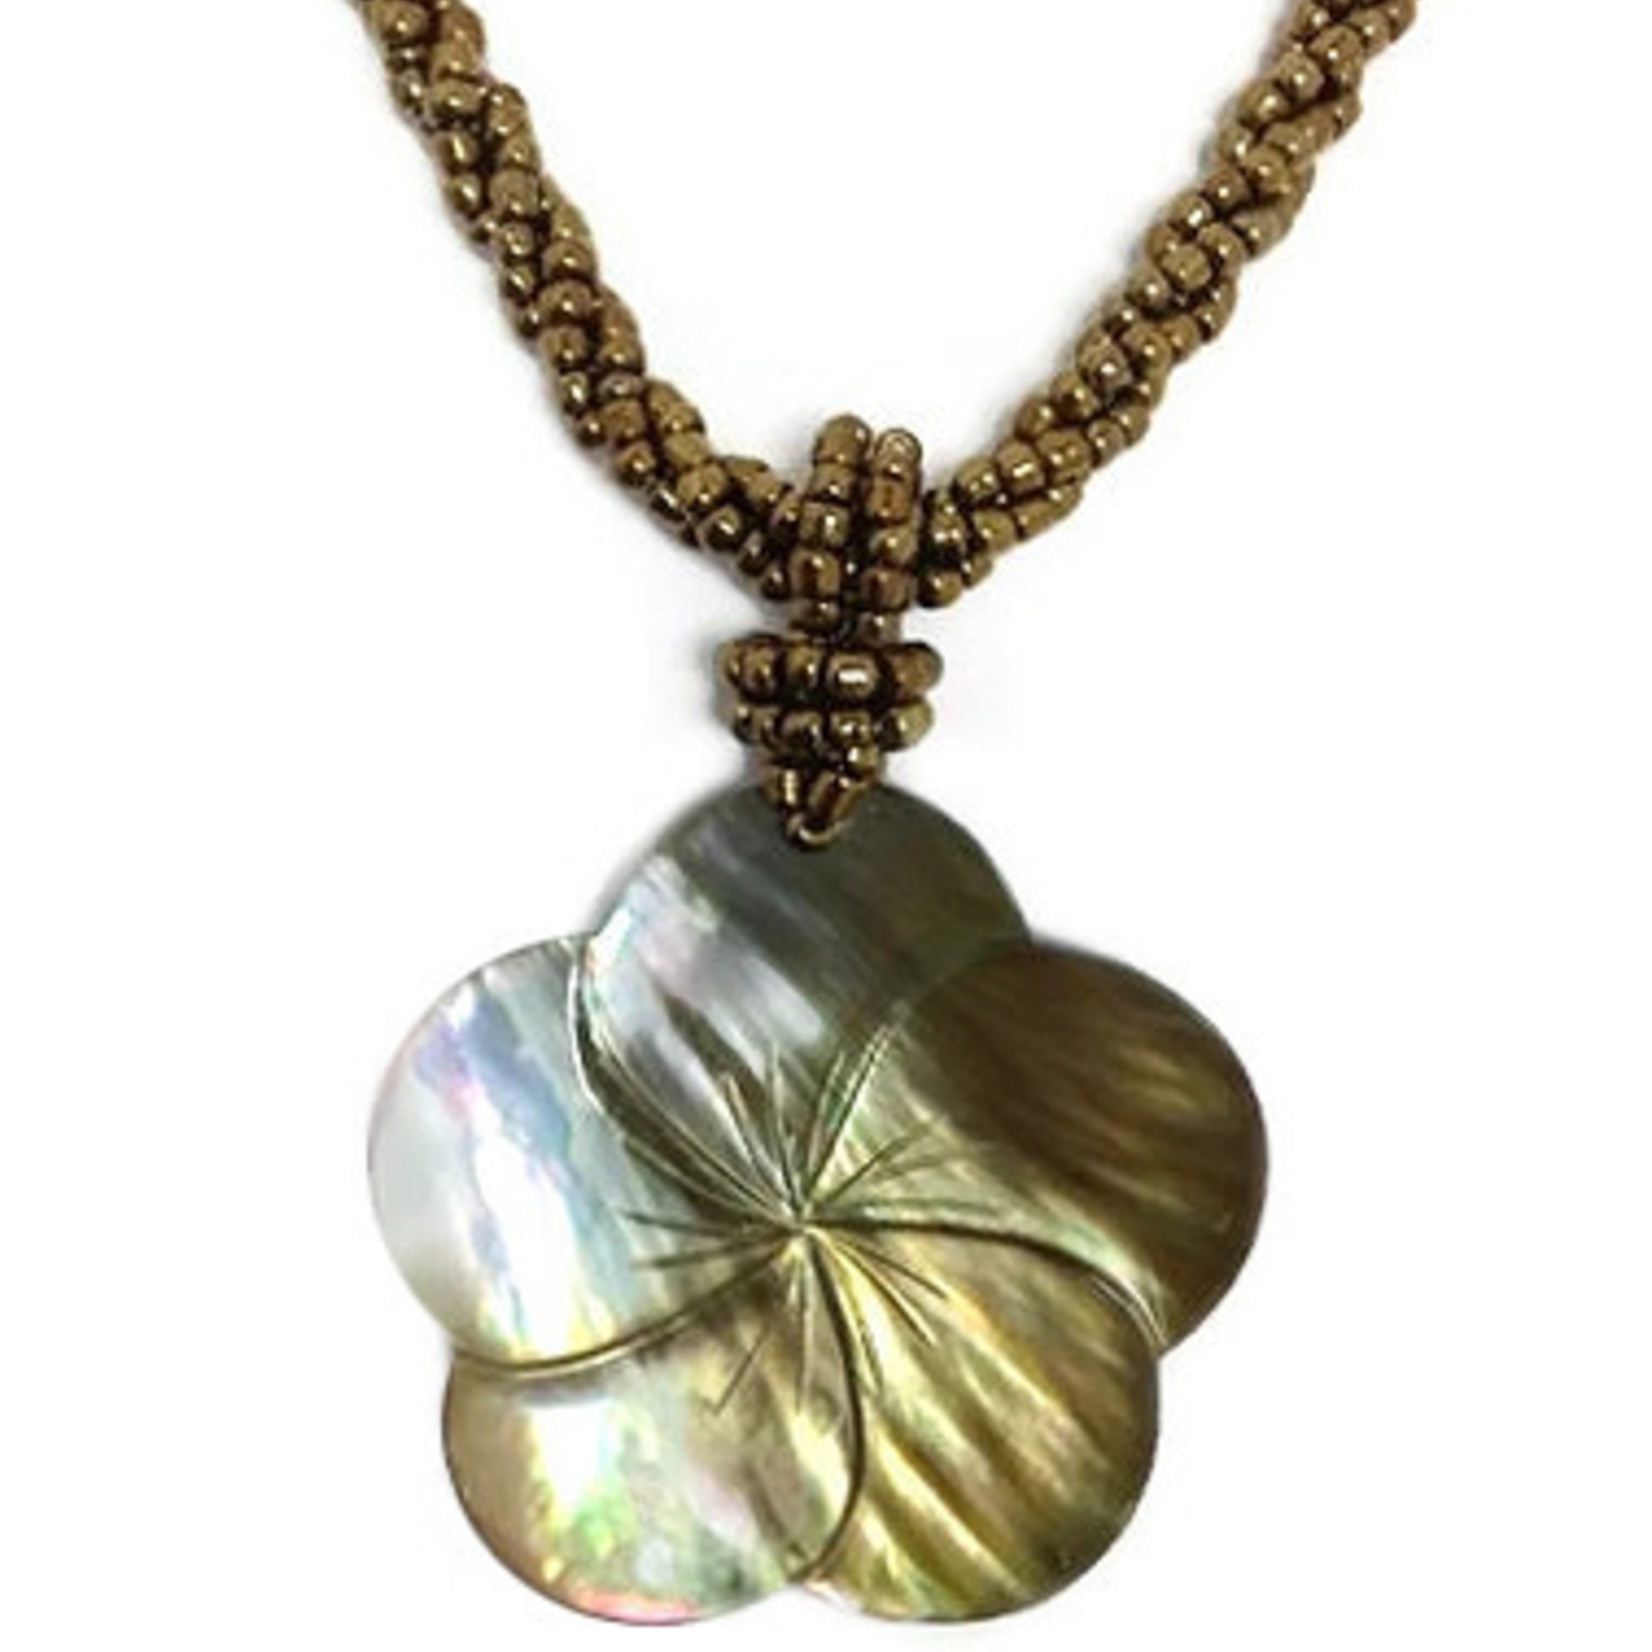 Shell Necklace Carved Gold Plumeria with Gold Beads - NB14